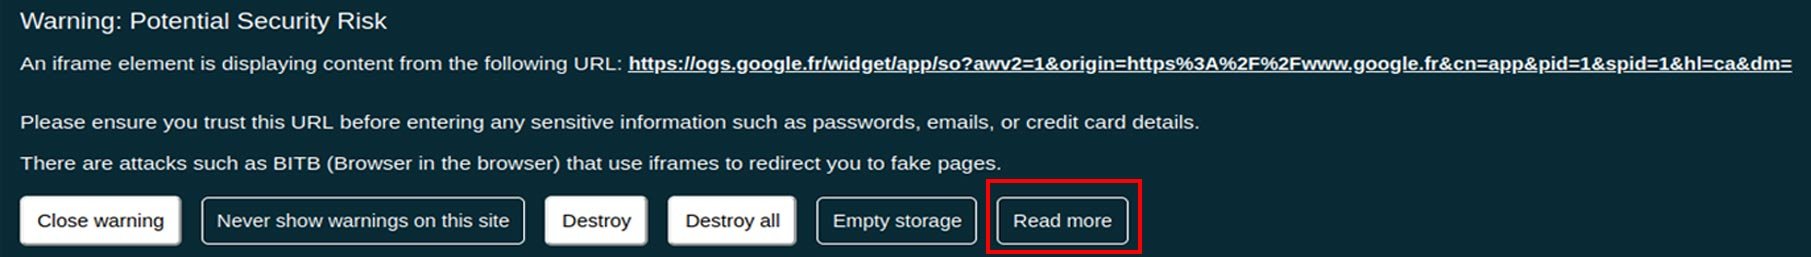 Read more of e EviBITB warning potential security risk BITB protection close warning nevers show warning on the site destroy one or all empty storage web navigator read more by Freemindtronic